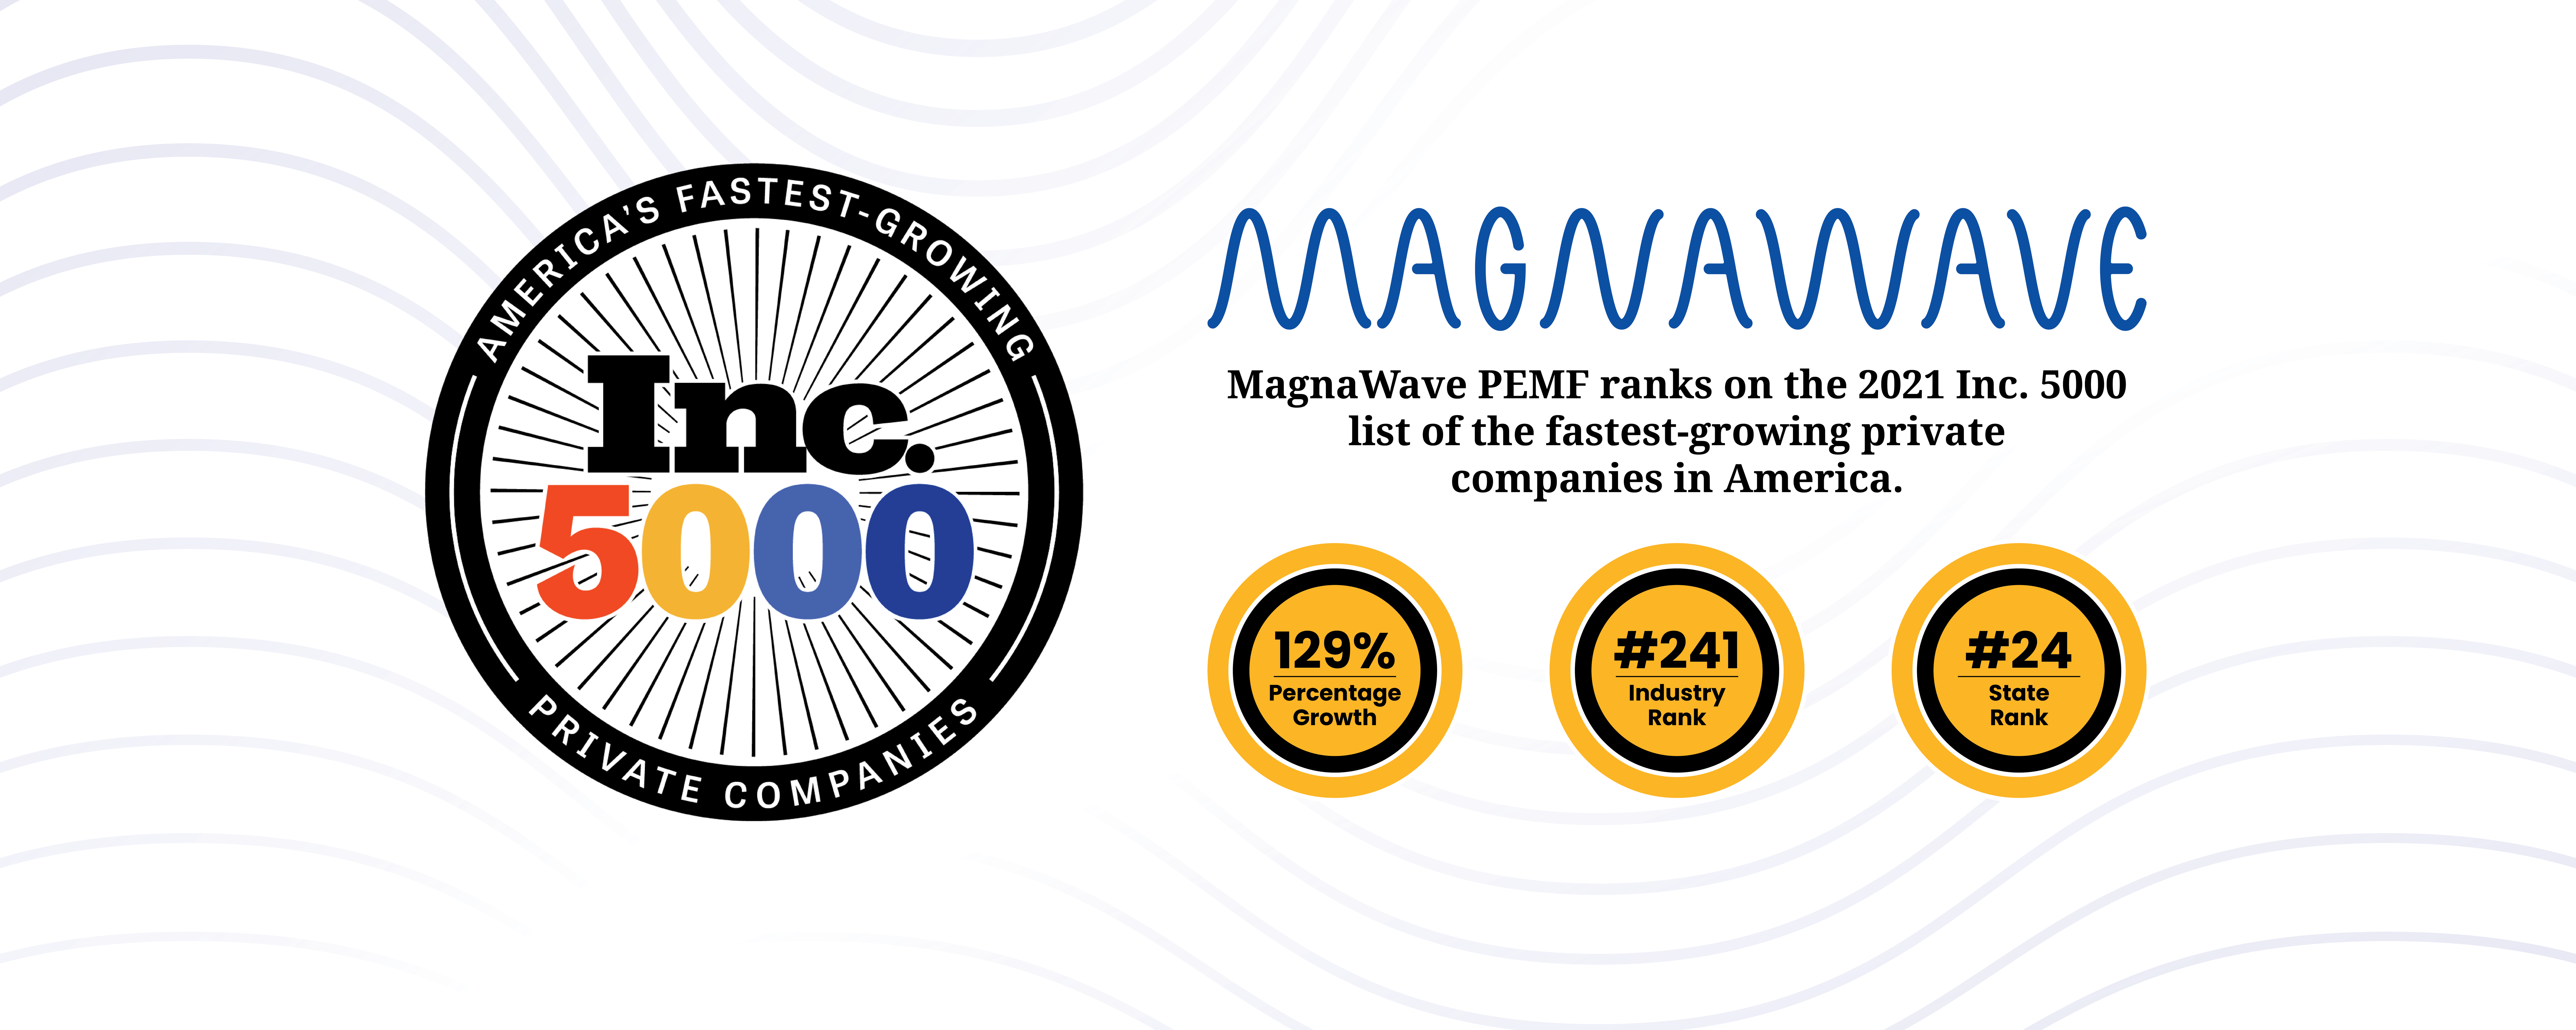 MagnaWave PEMF Ranks No. 2,981 on the 2021 Inc. 5000 list of the fastest-growing private companies in America.